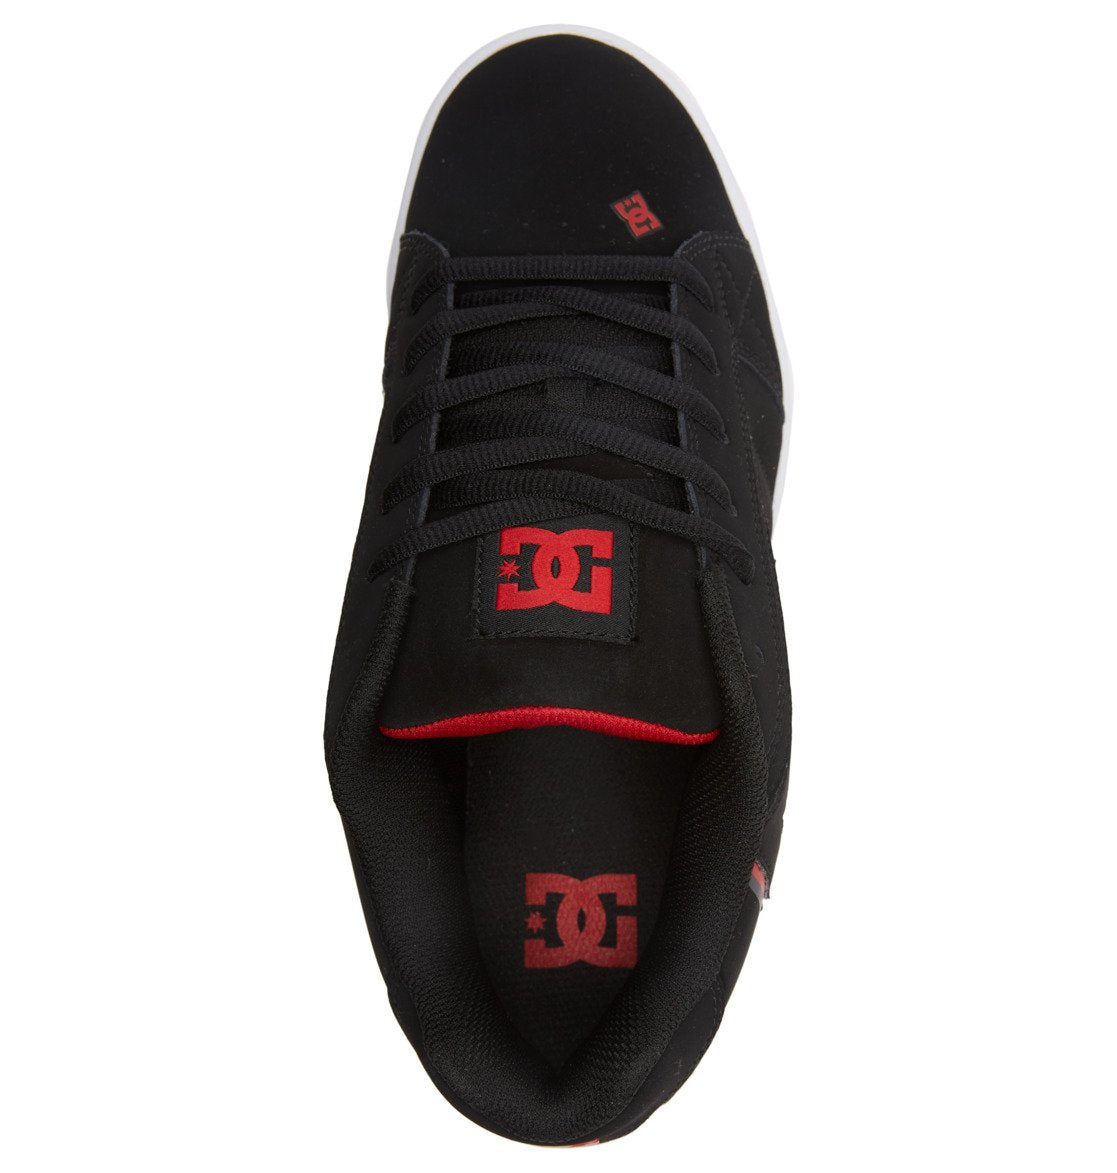 DC SHOES NET BLACK & RED TRAINERS